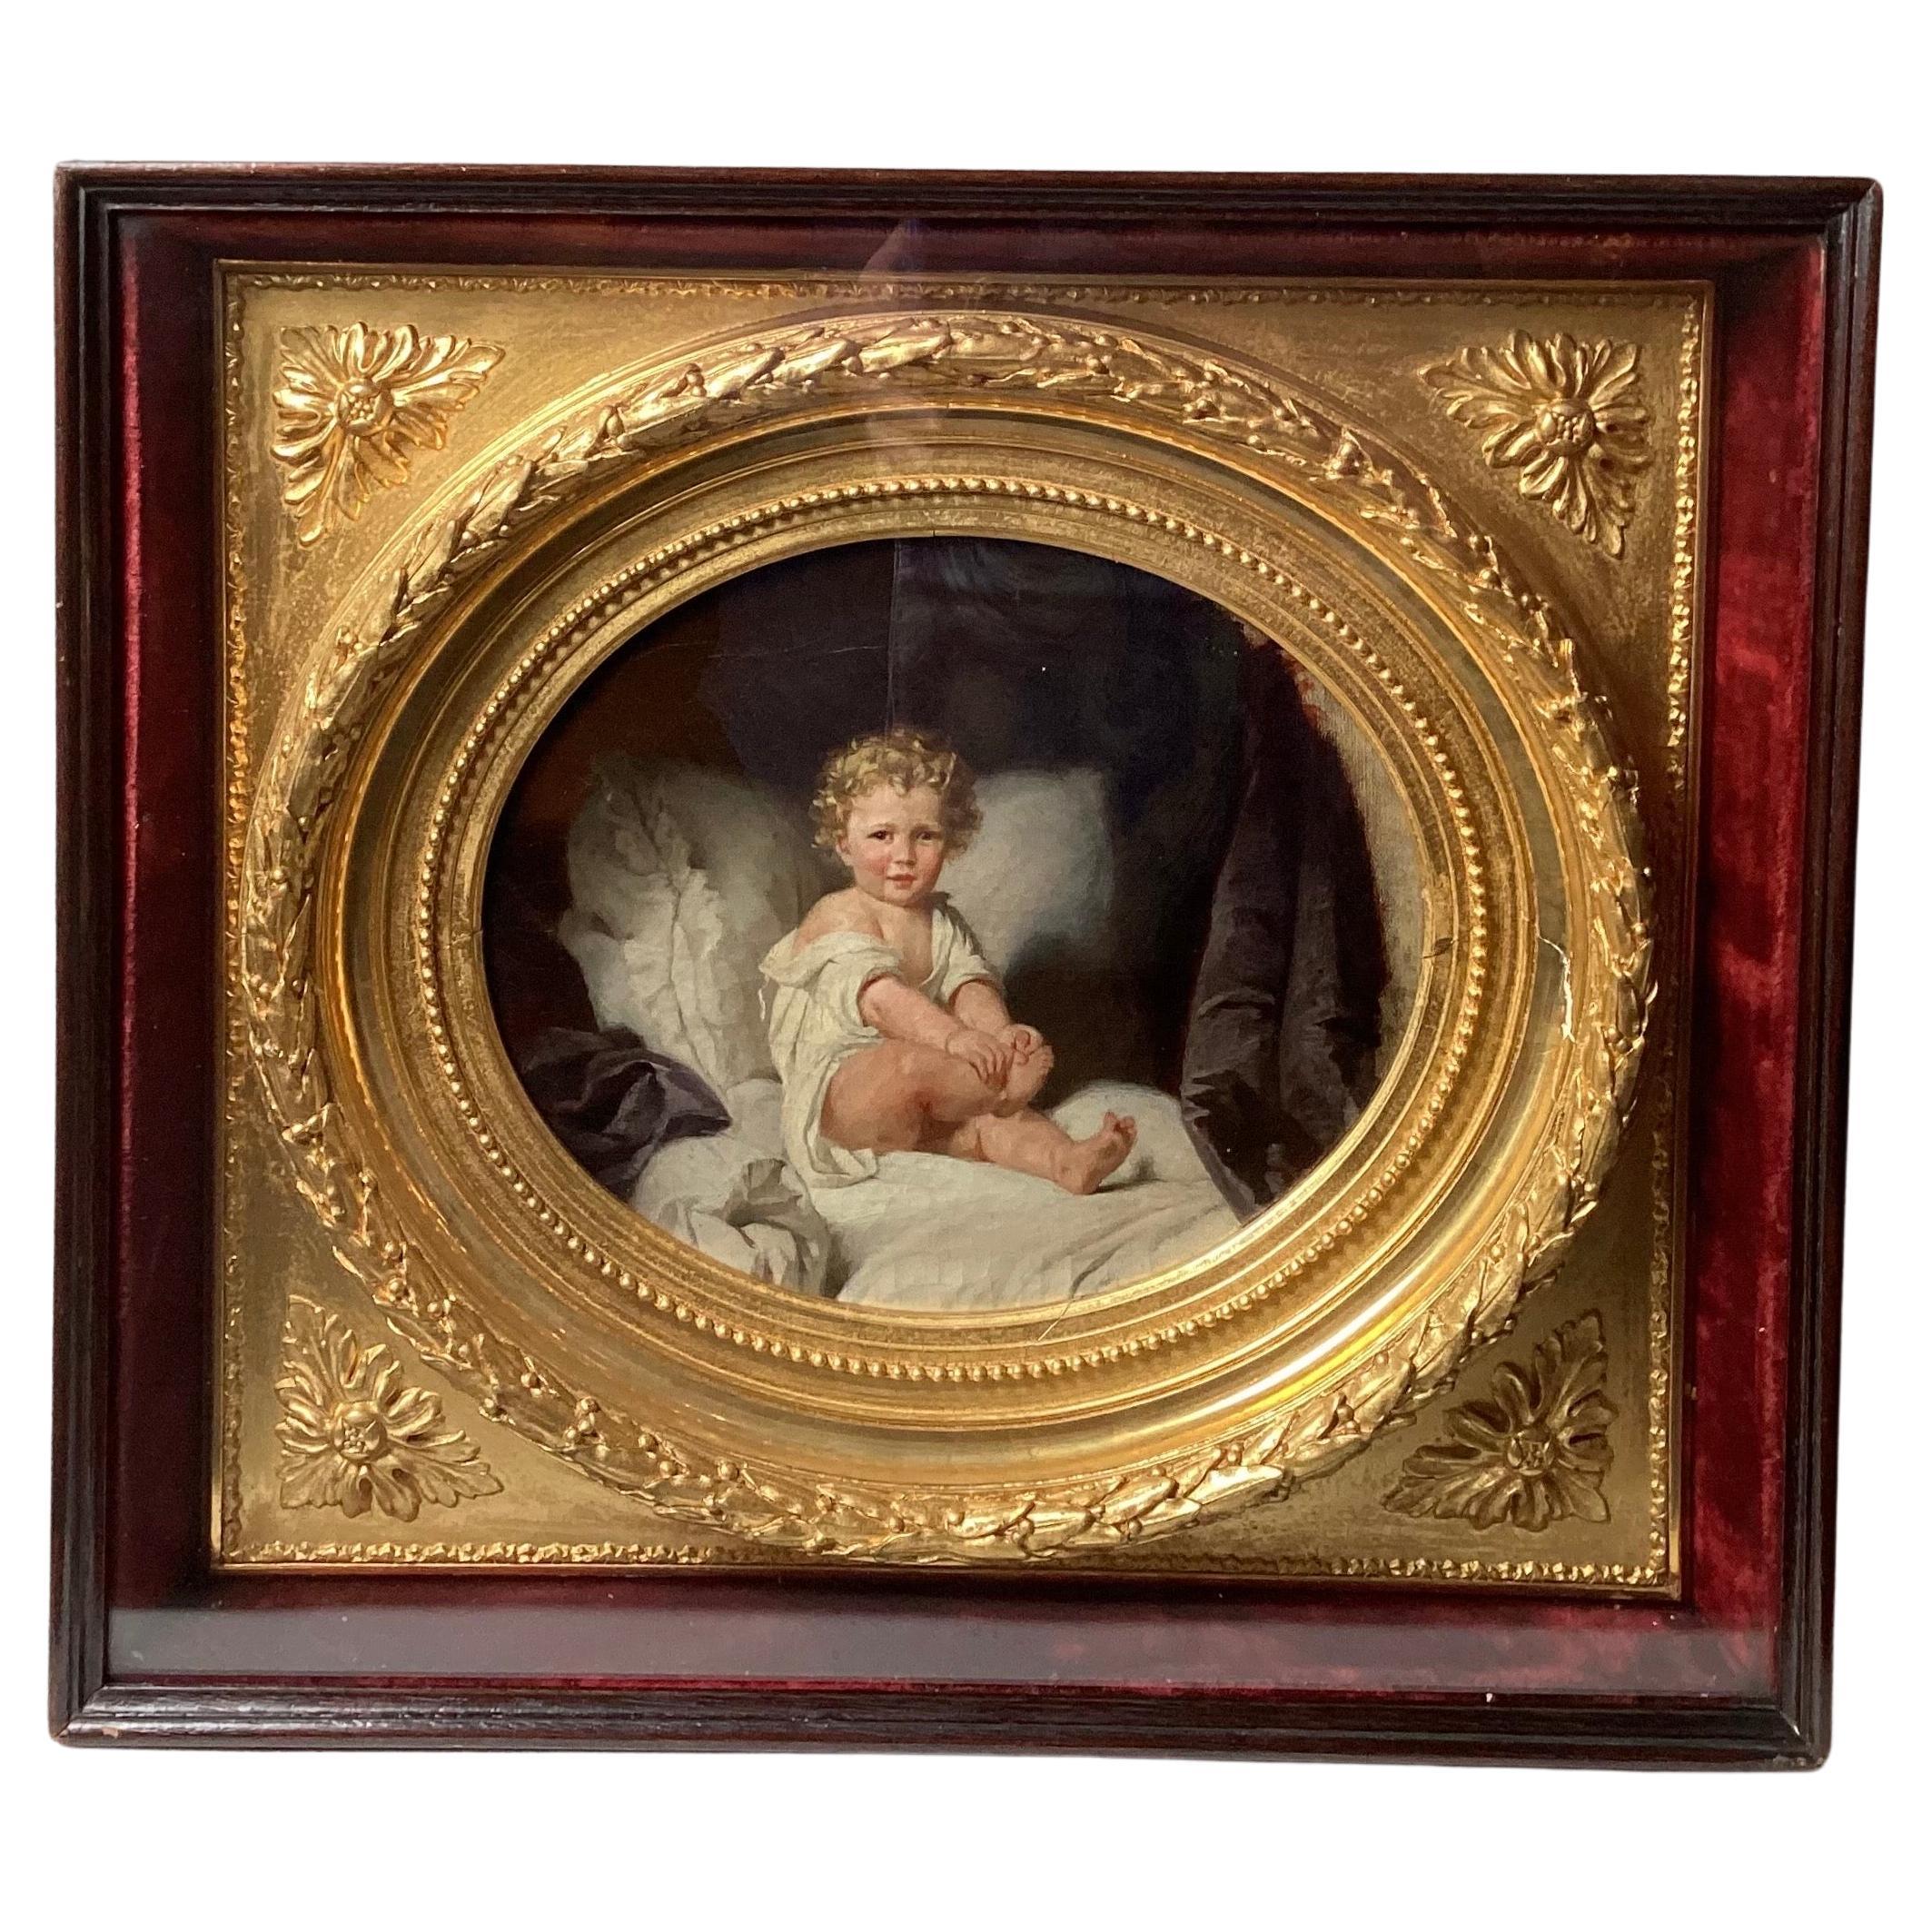 Beautiful Portrait of Young Boy with GOlden Hair in a Stunning Original giltwood For Sale